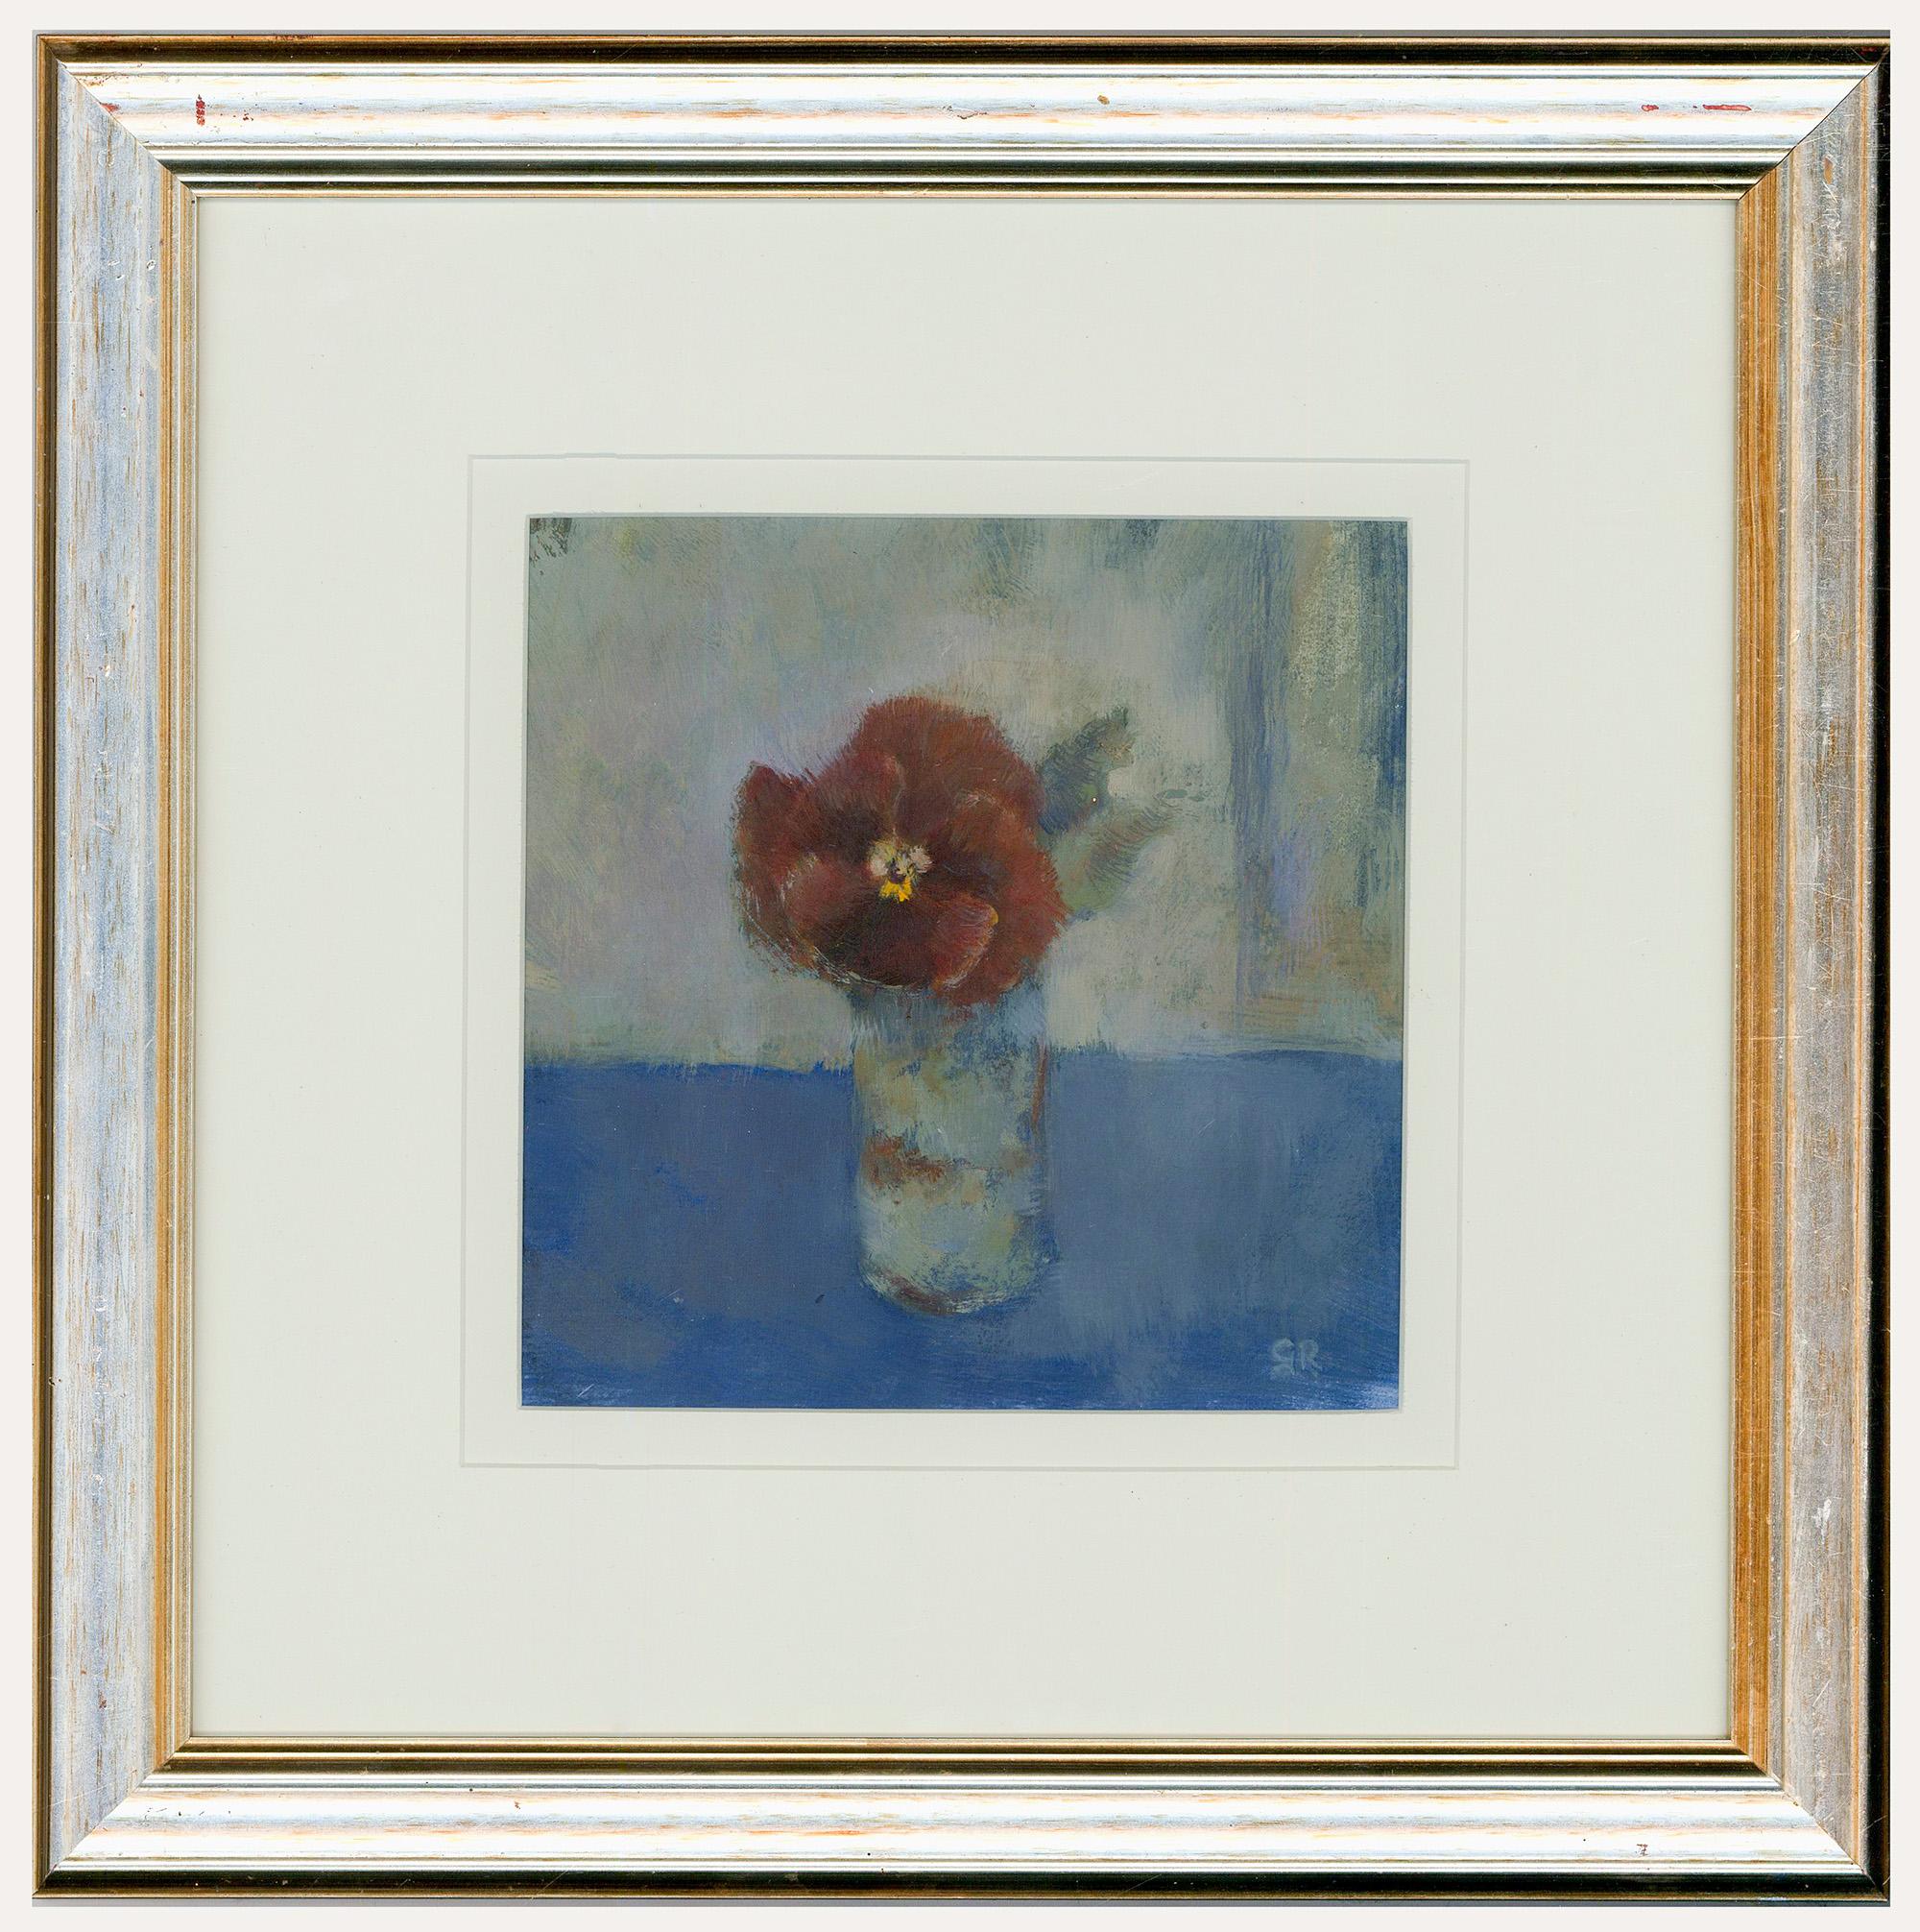 Unknown Still-Life Painting - G.R - Framed Contemporary Oil, Flower in a Vase